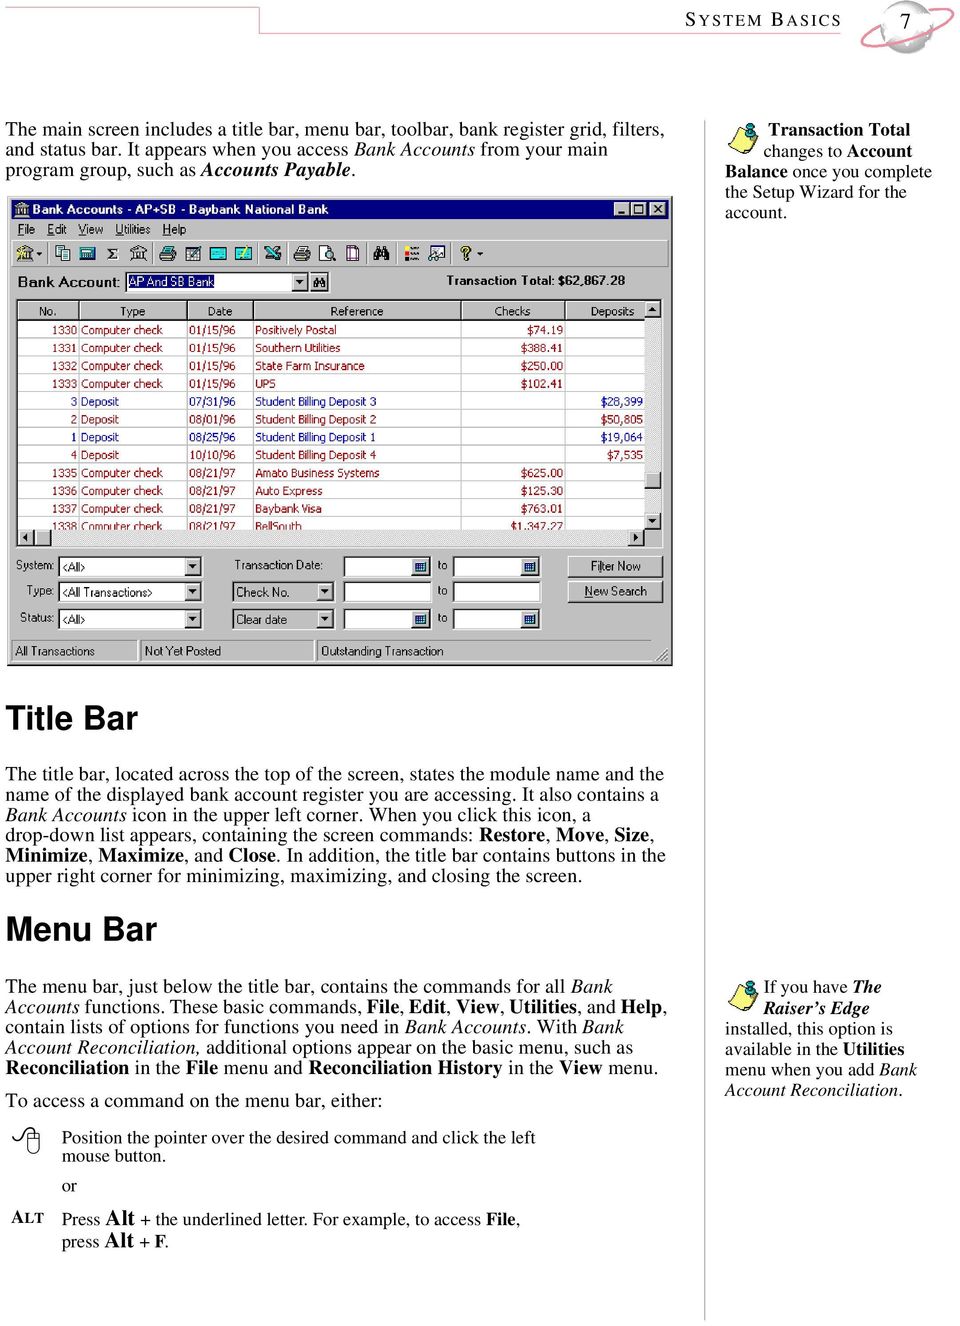 Title Bar The title bar, located across the top of the screen, states the module name and the name of the displayed bank account register you are accessing.